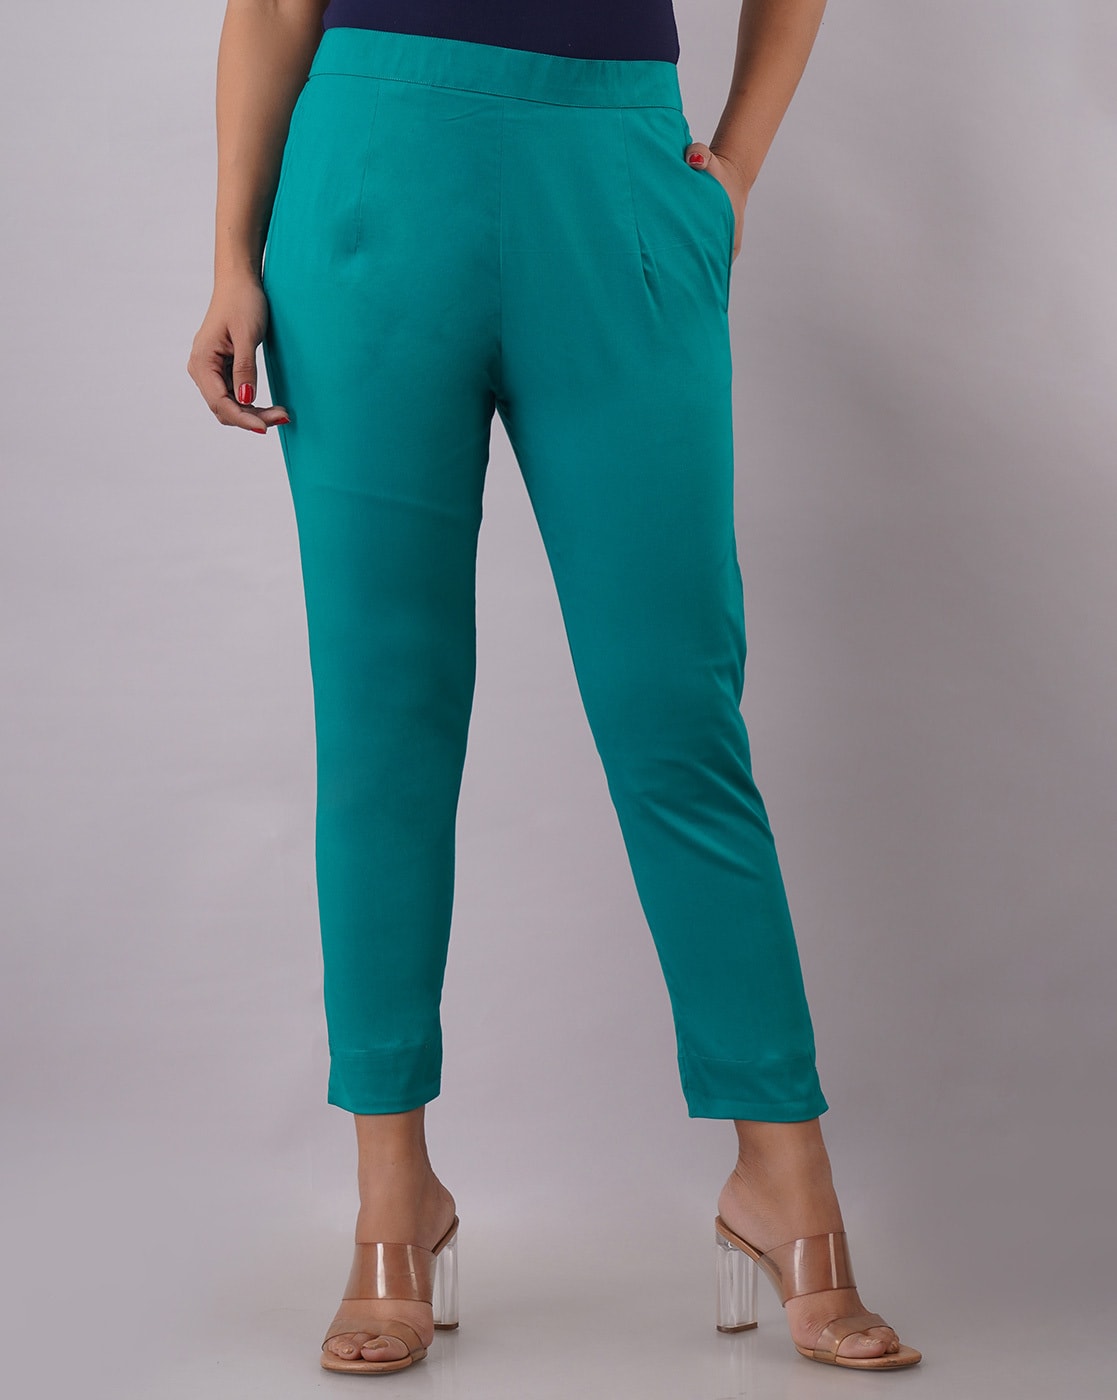 Buy Red Trousers & Pants for Women by W Online | Ajio.com